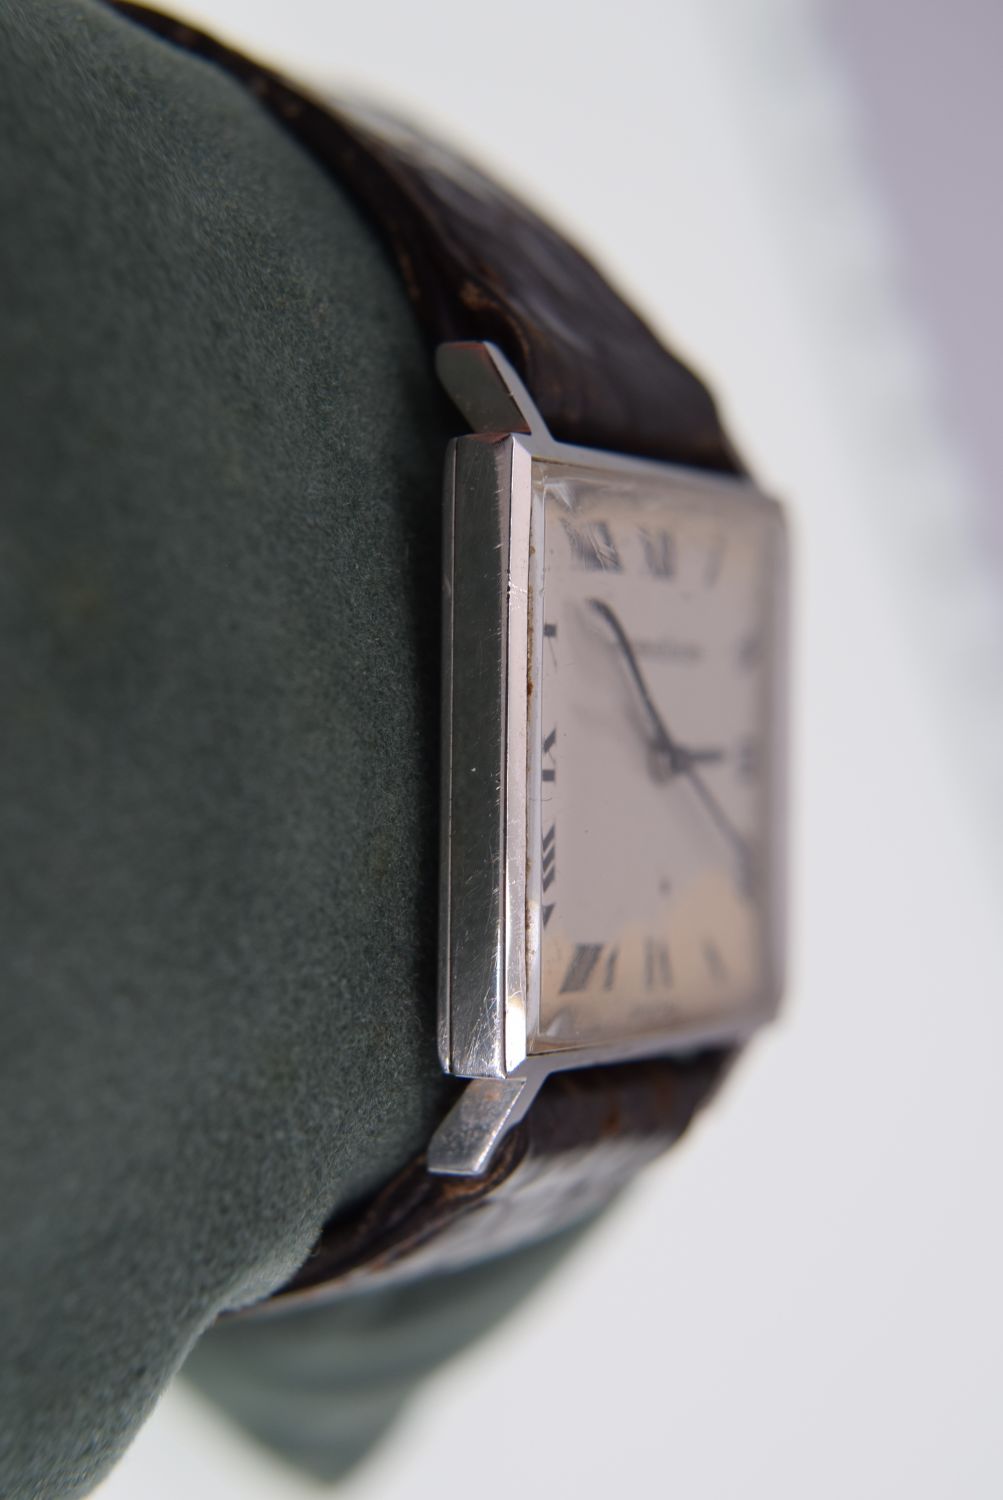 JAEGER LE-COULTRE WATCH ON LEATHER BAND - Image 3 of 4